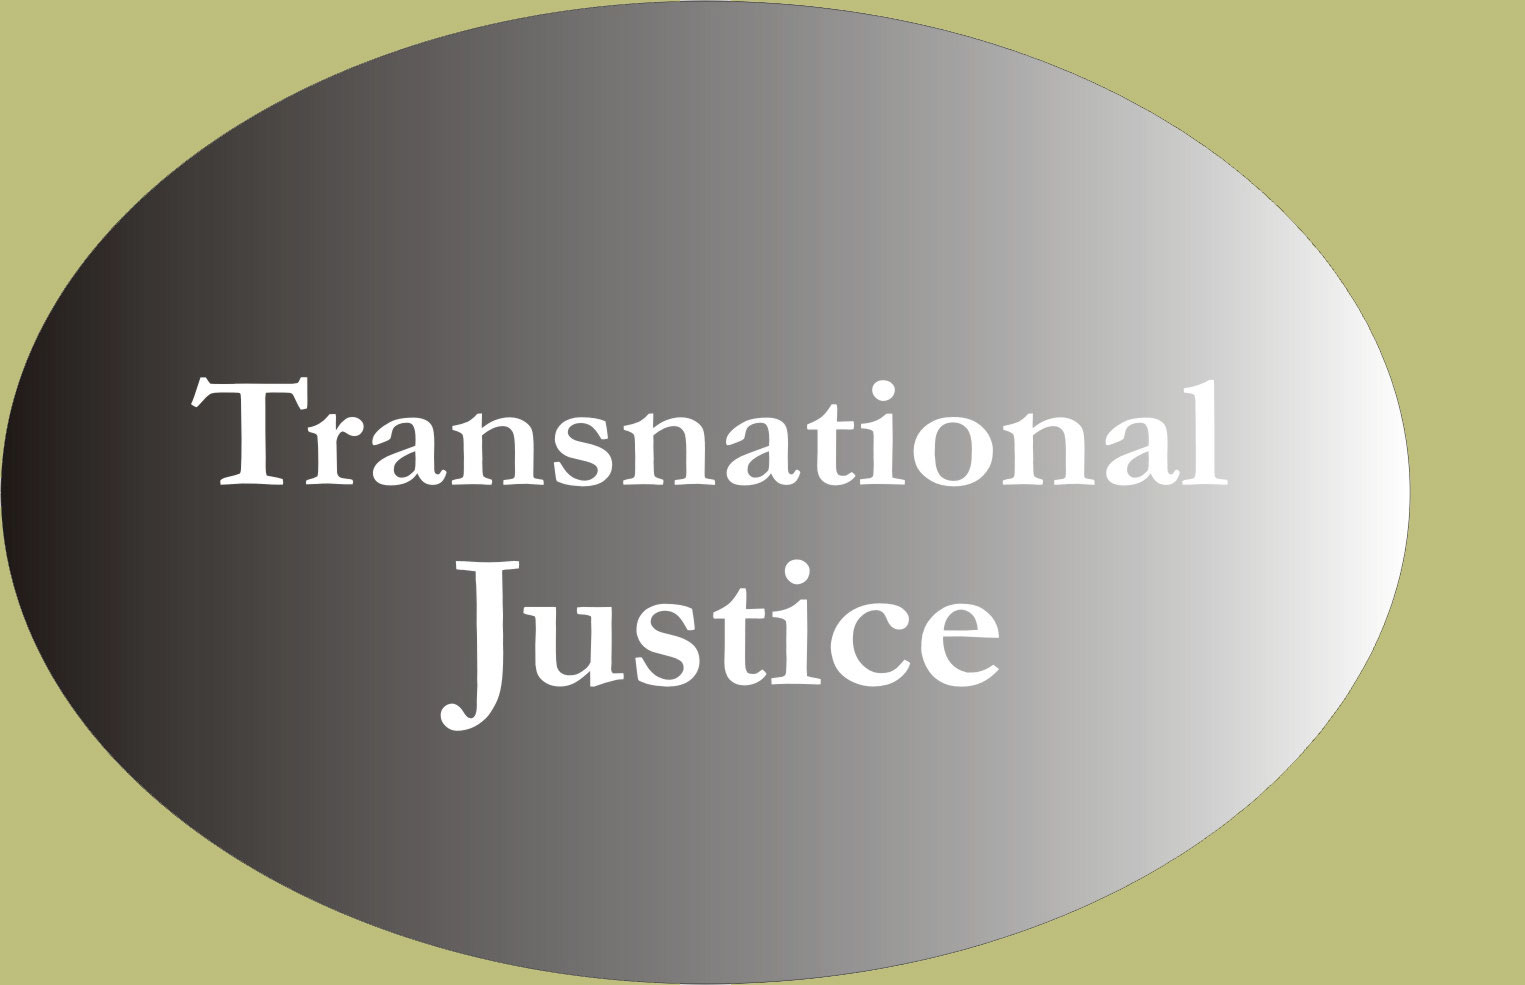 Transnational possibilities of Justice